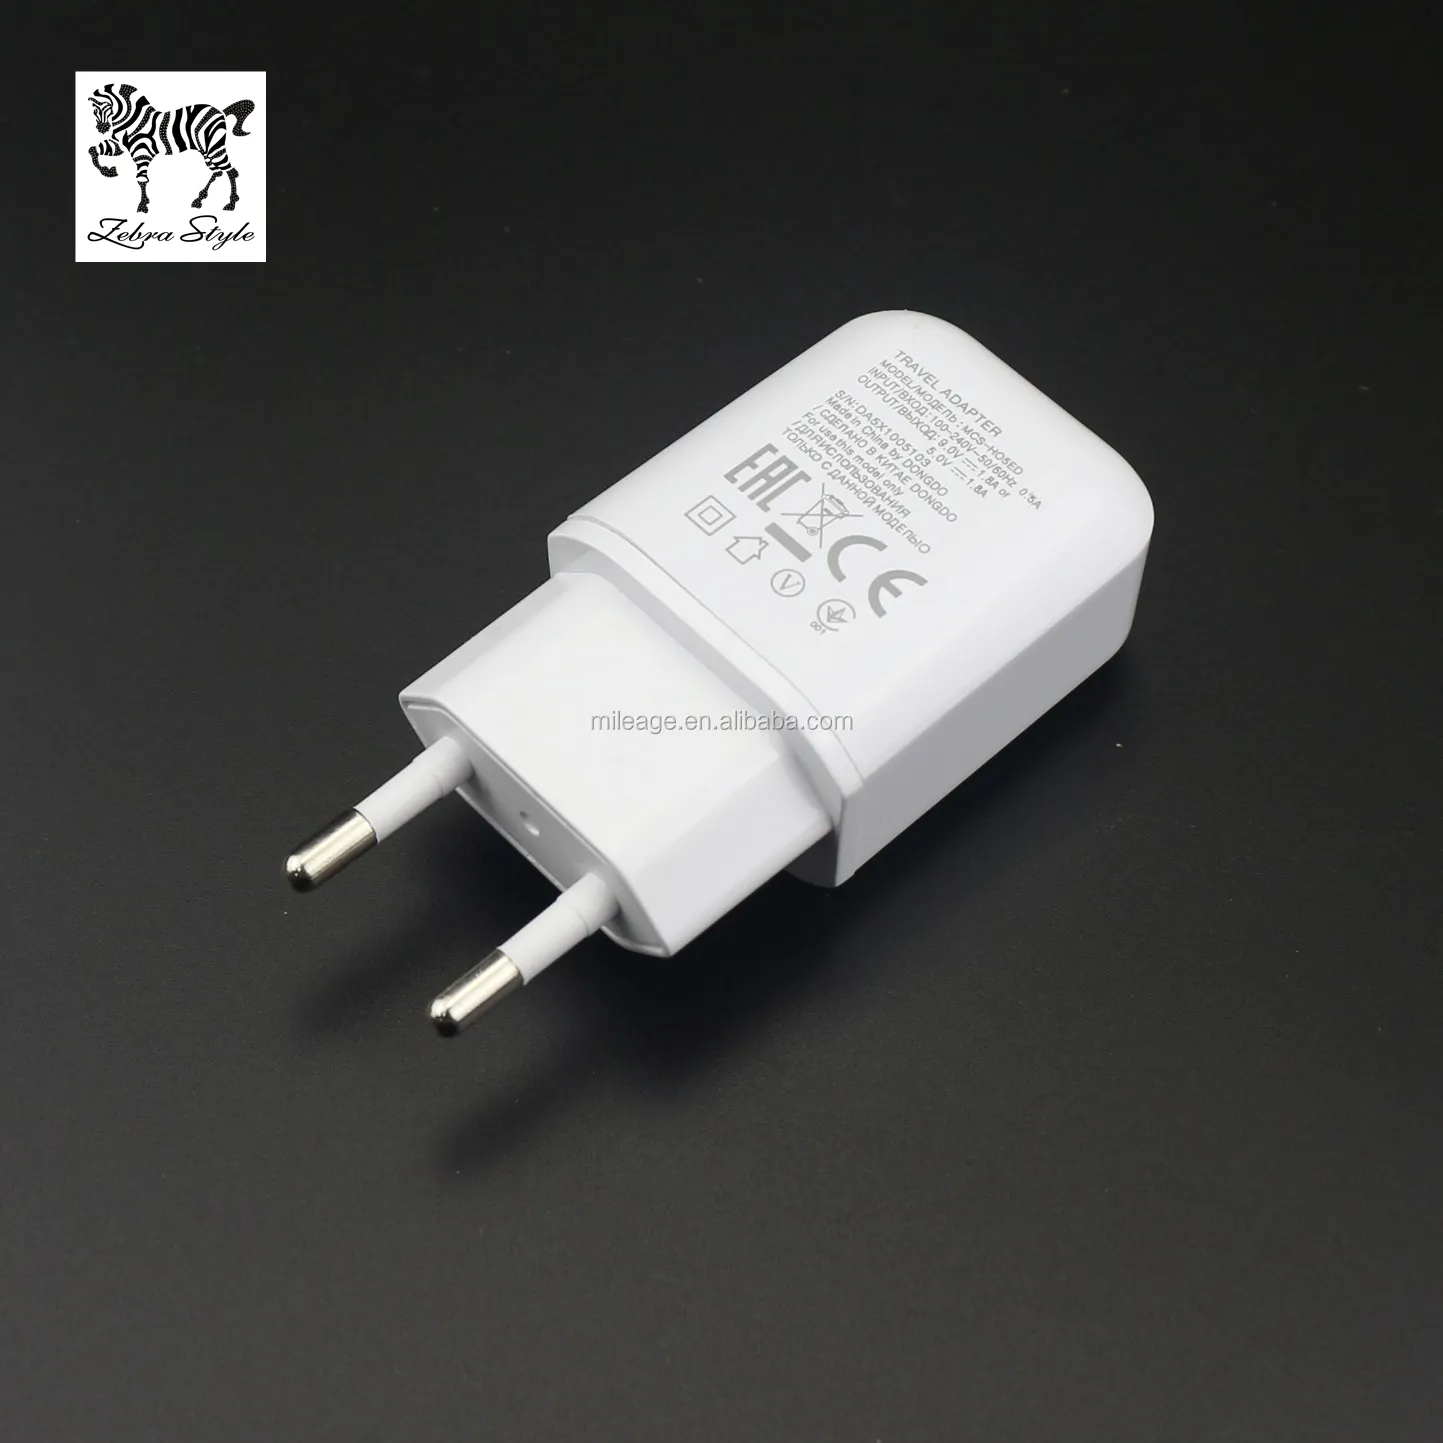 G5 for LG MObile Phone Travel Wall Charger Original MCS-H05ED 9V 1.8A 5V 1.8A Charger Adapter